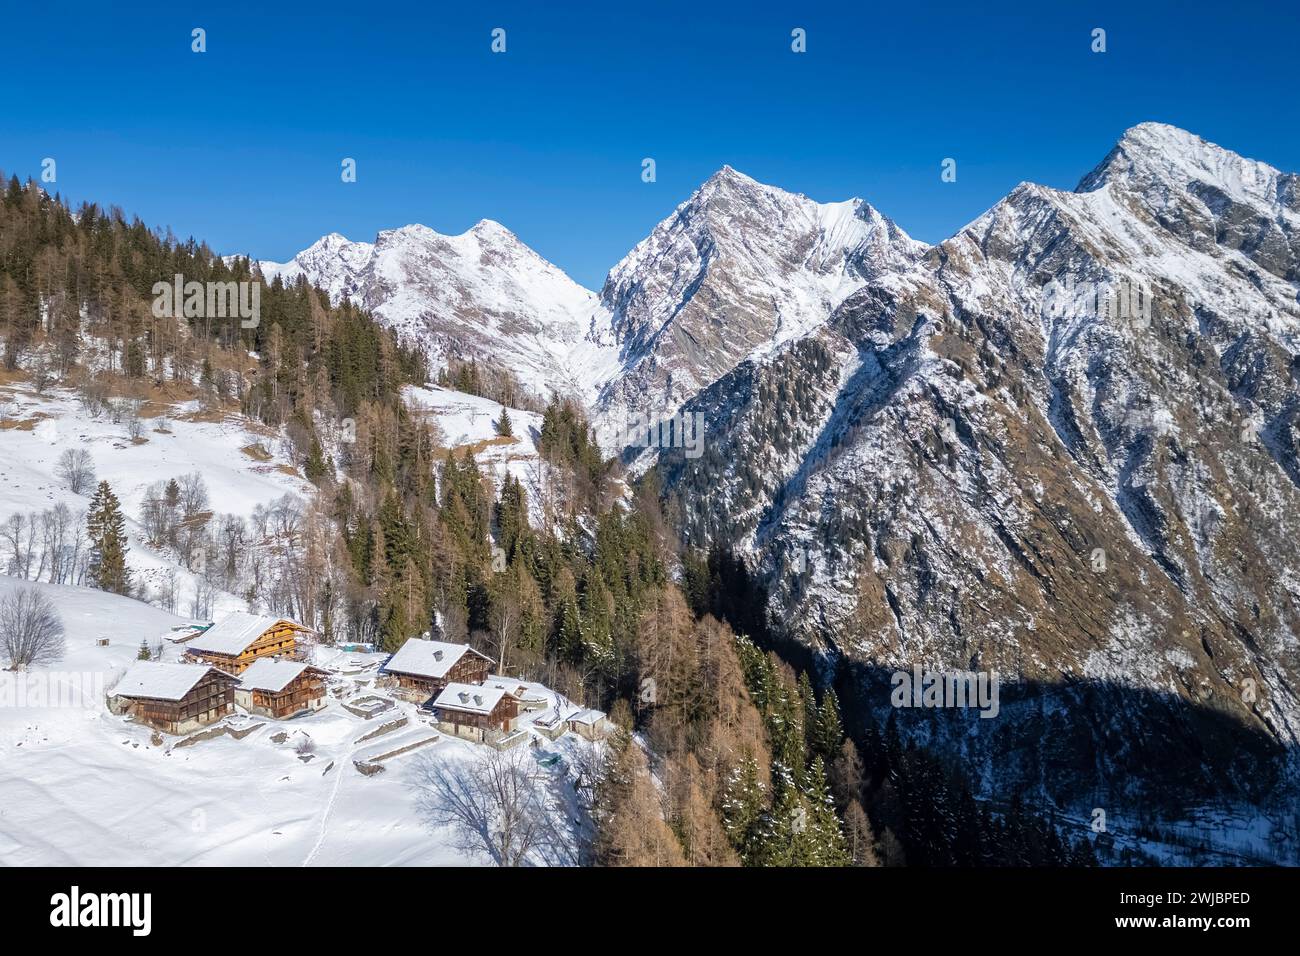 Aerial view of walser huts in Alpe Otro. Alagna, Valsesia, Vercelli province, Piedmont, Italy, Europe. Stock Photo